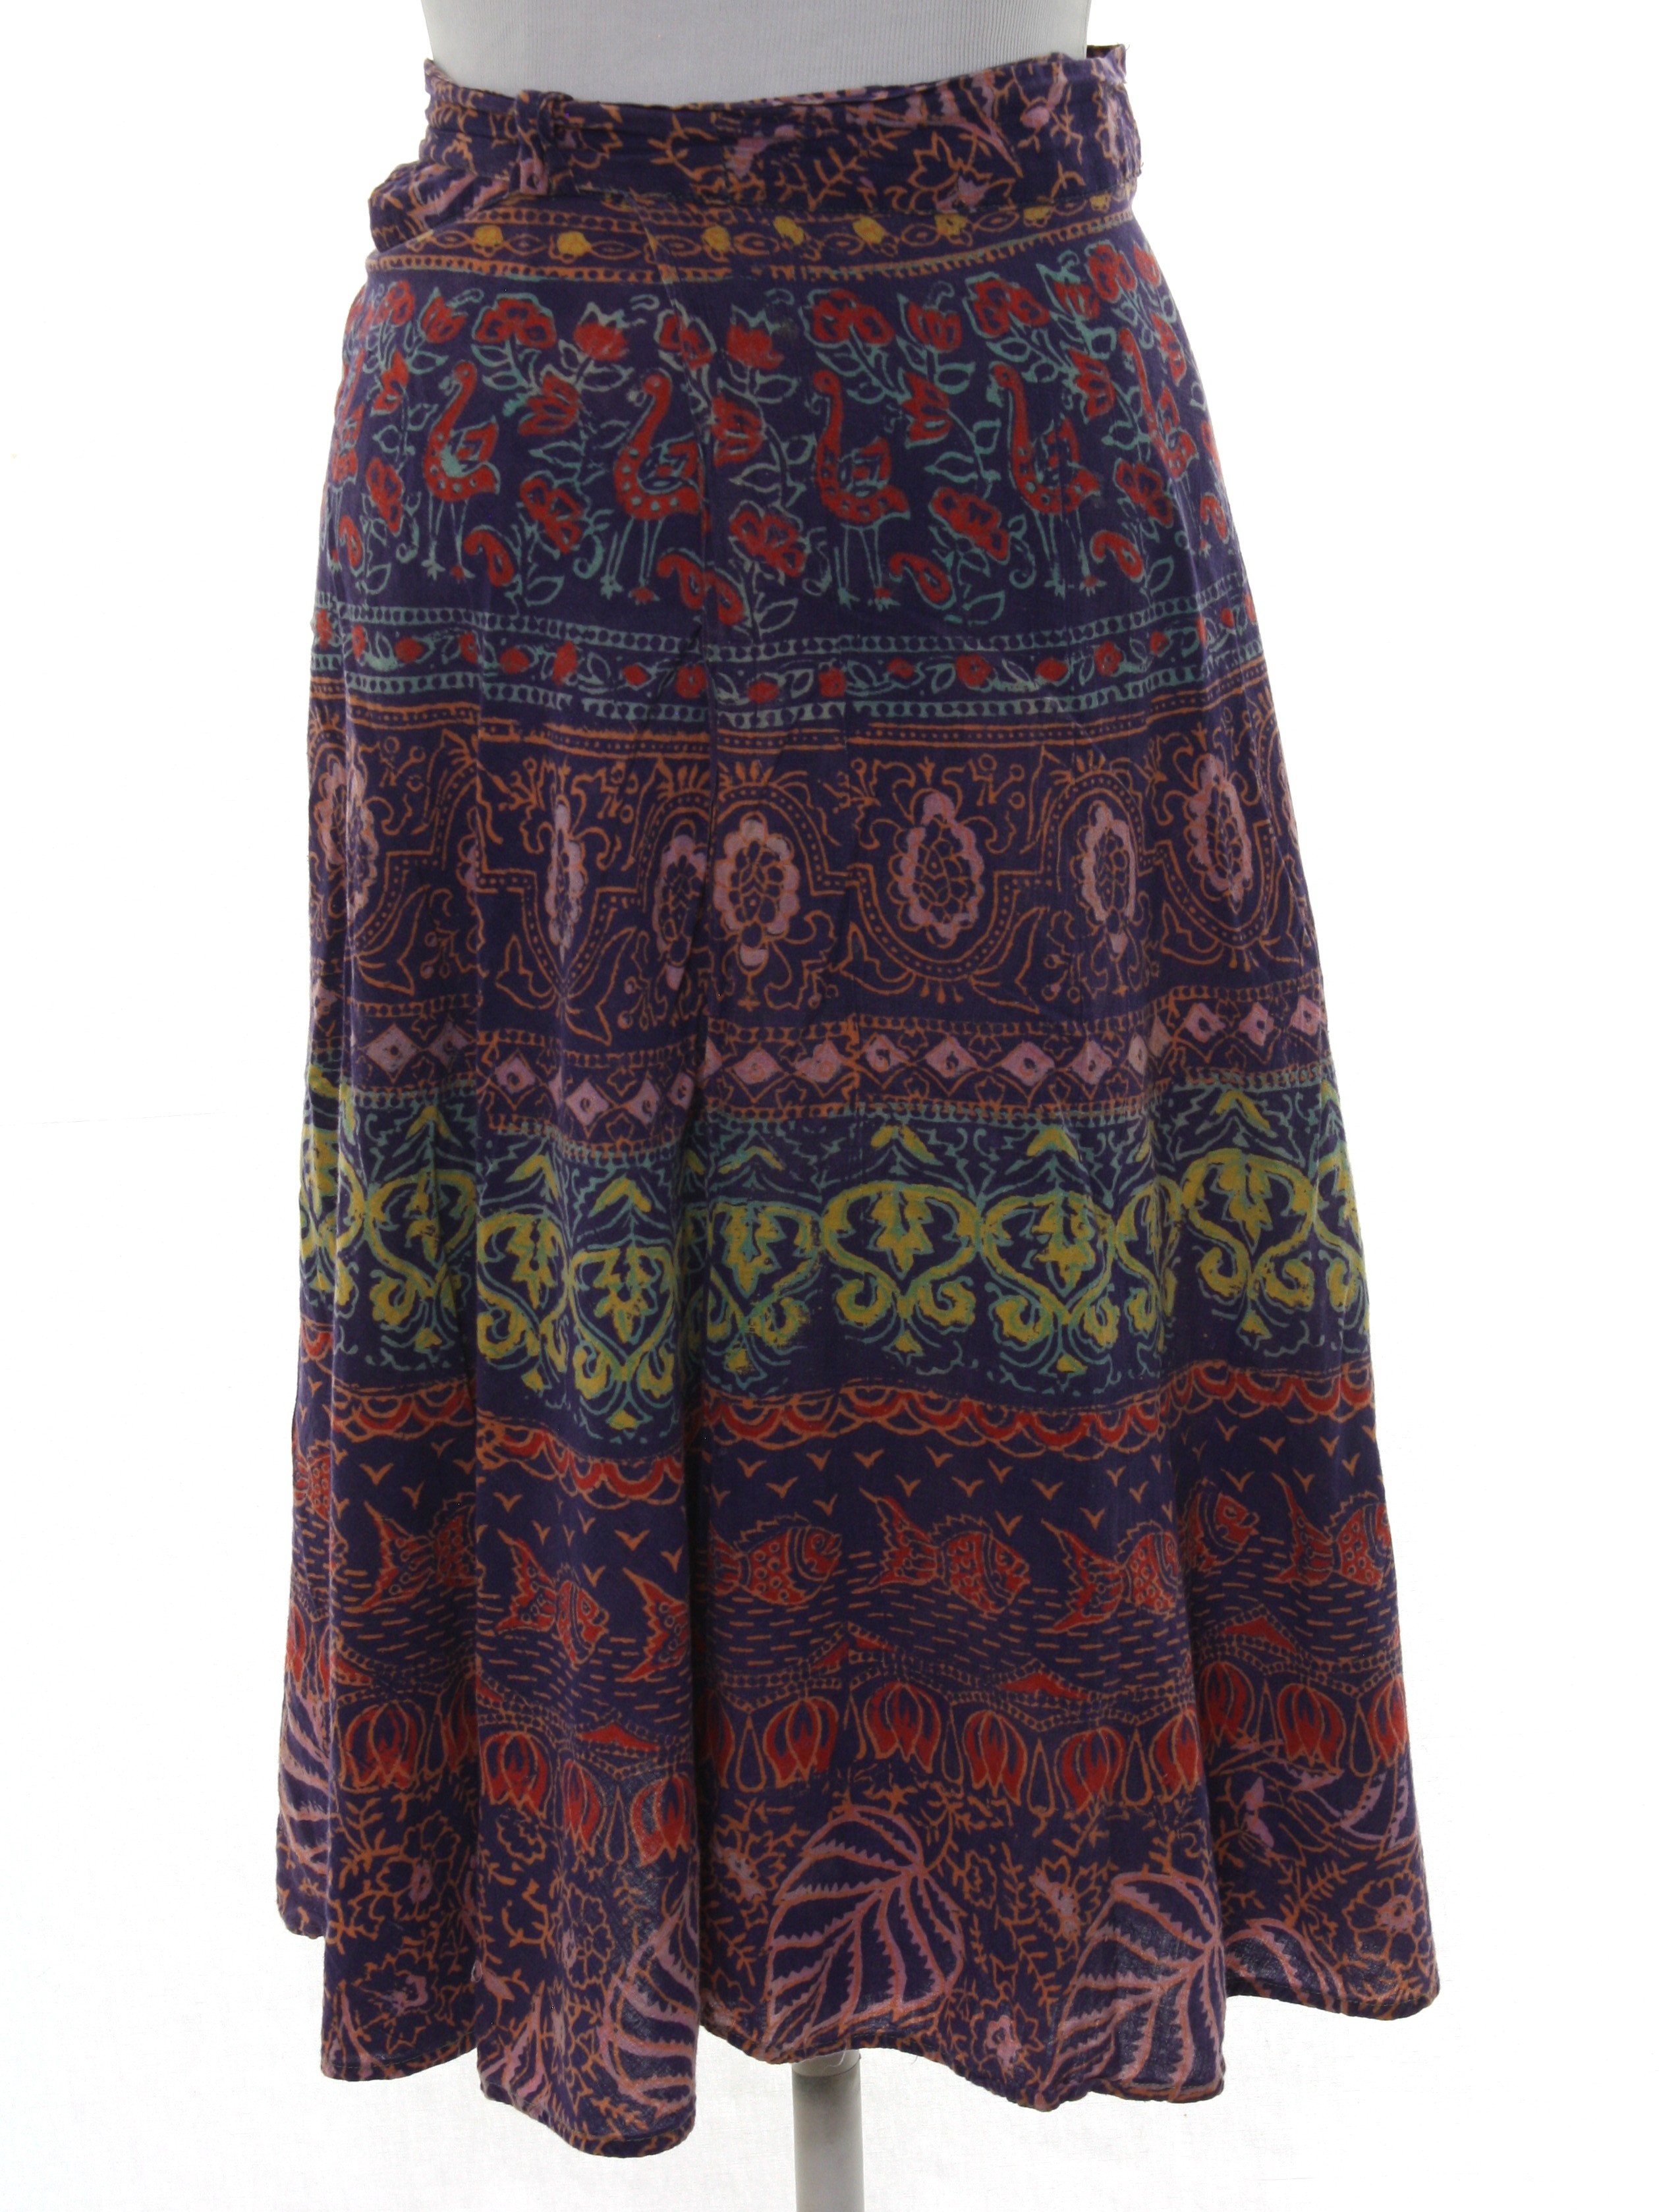 90s Hippie Skirt (Made in India): 90s or newer -Made in India- Womens ...